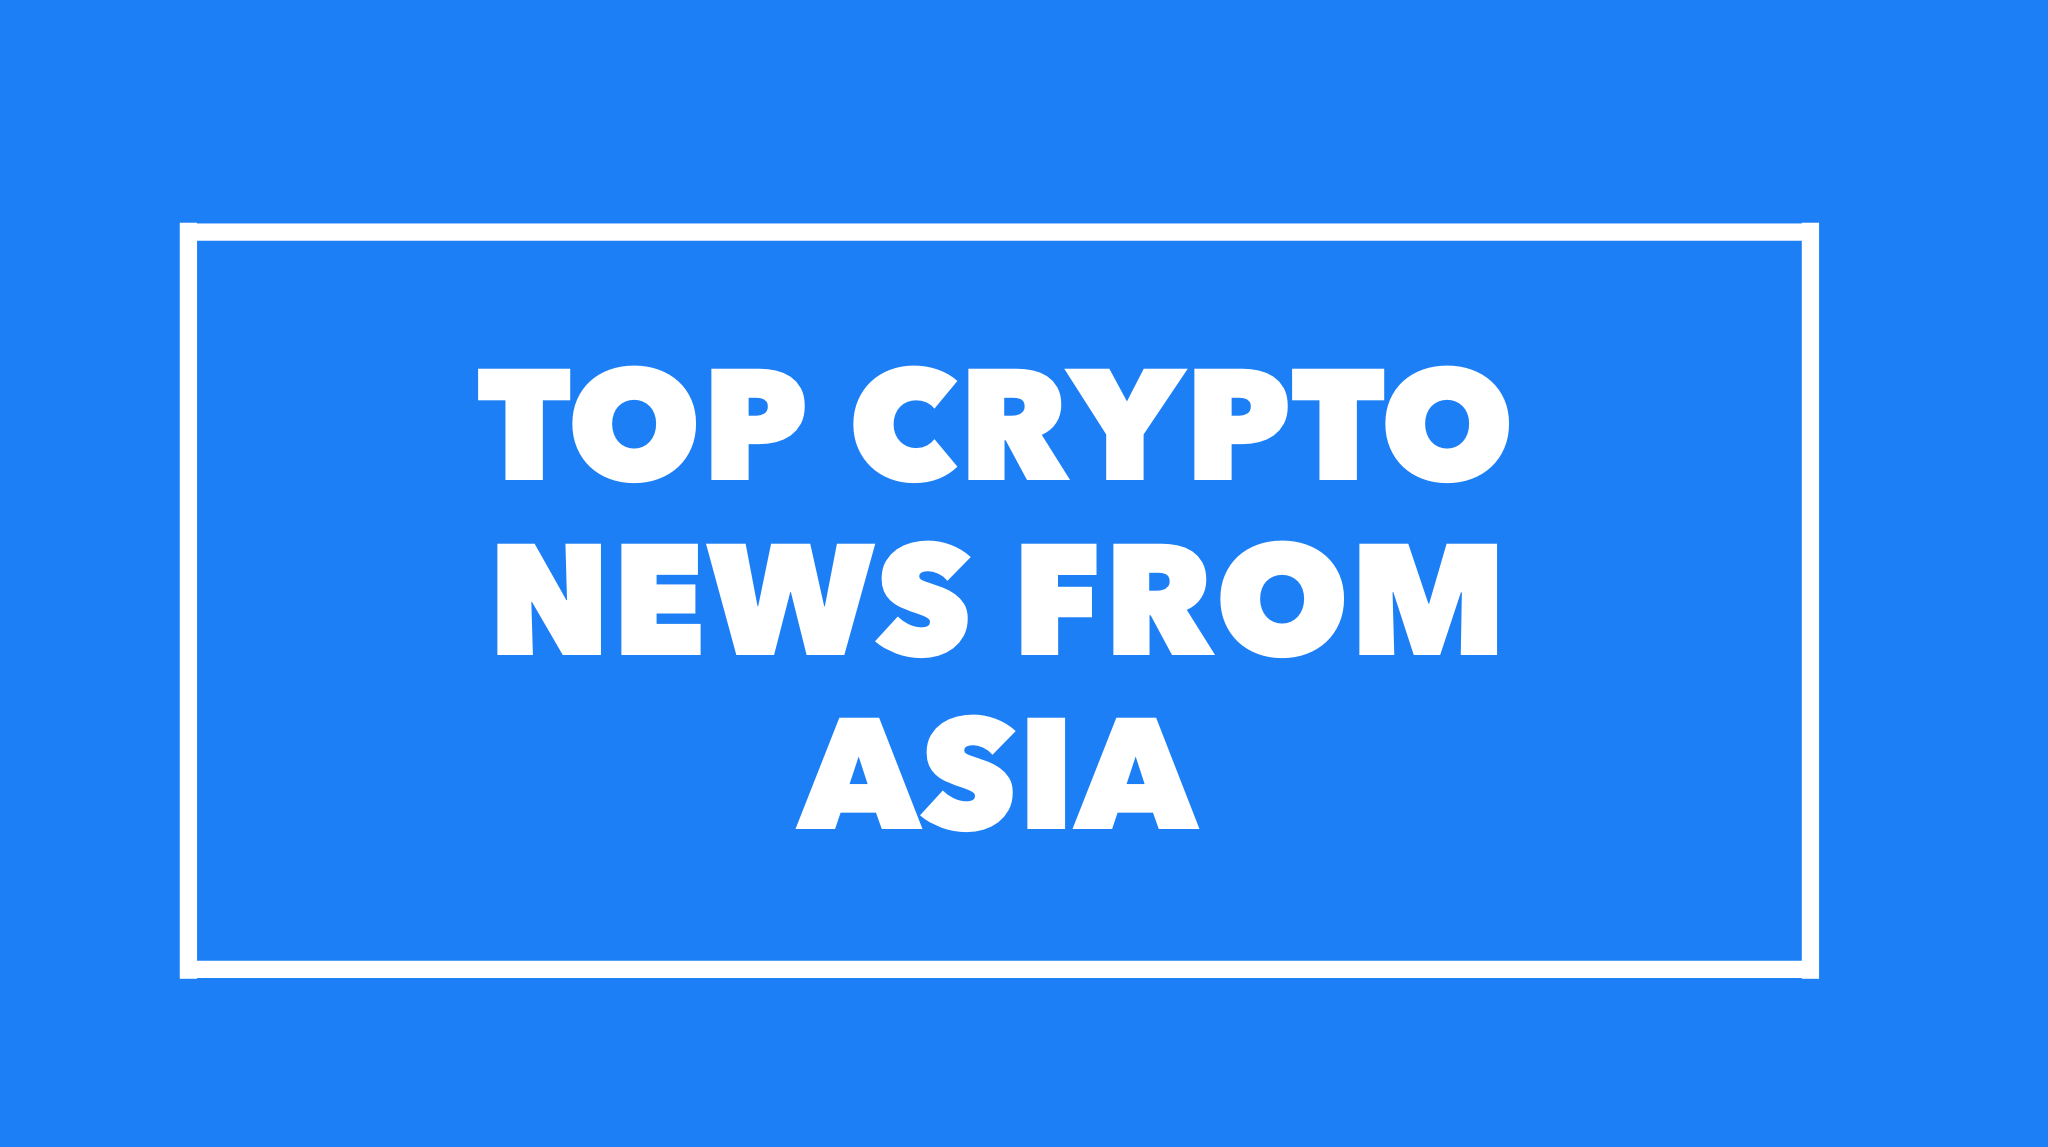 Asia Crypto News Roundup from Jan 5th-8th